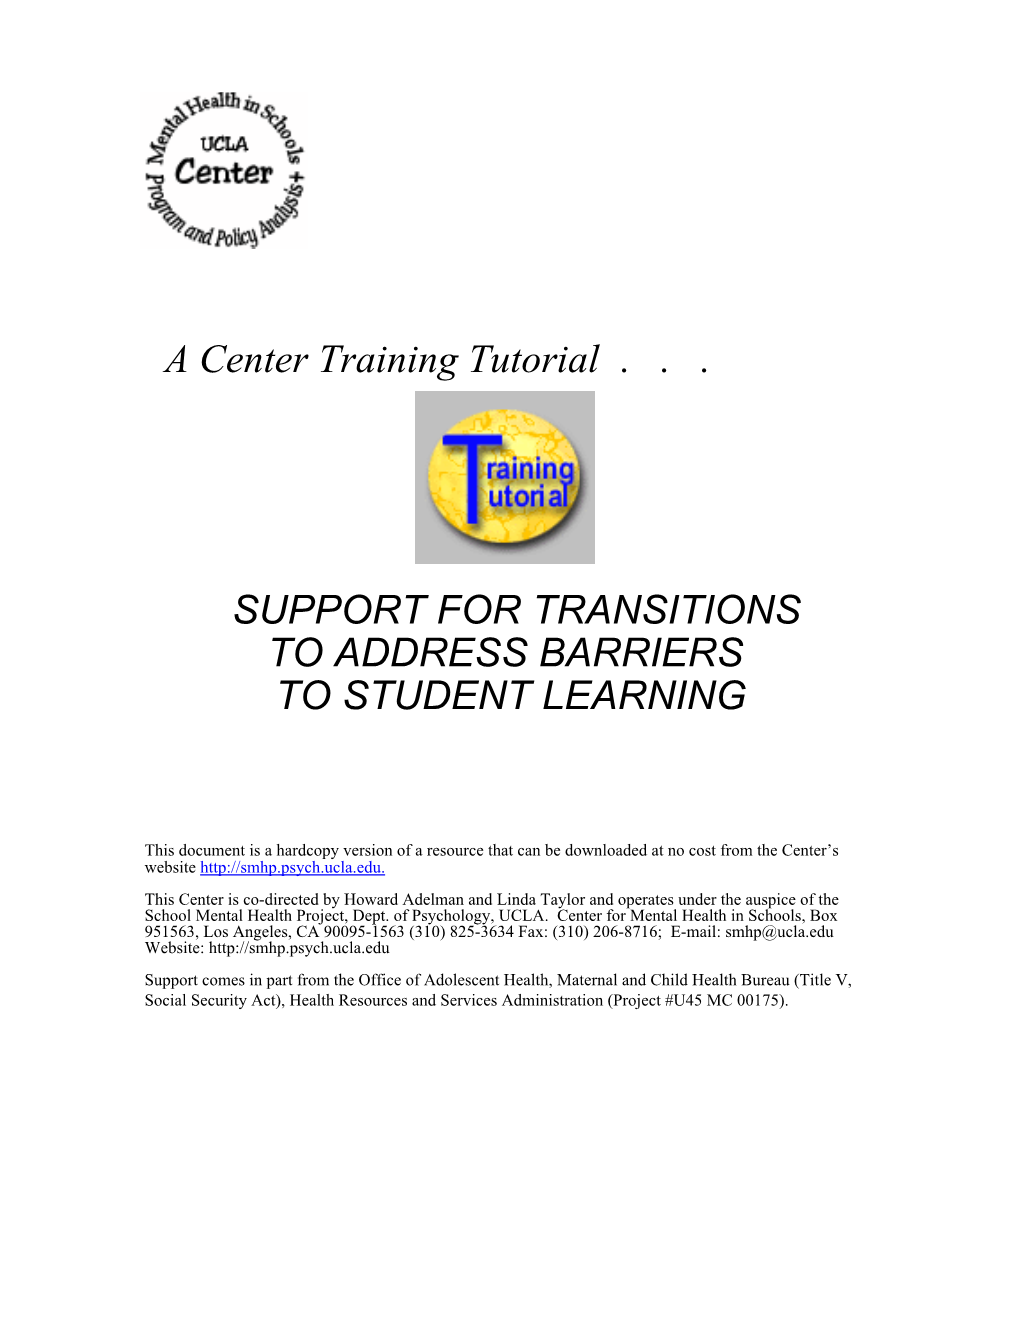 Support for Transitions to Address Barriers to Student Learning